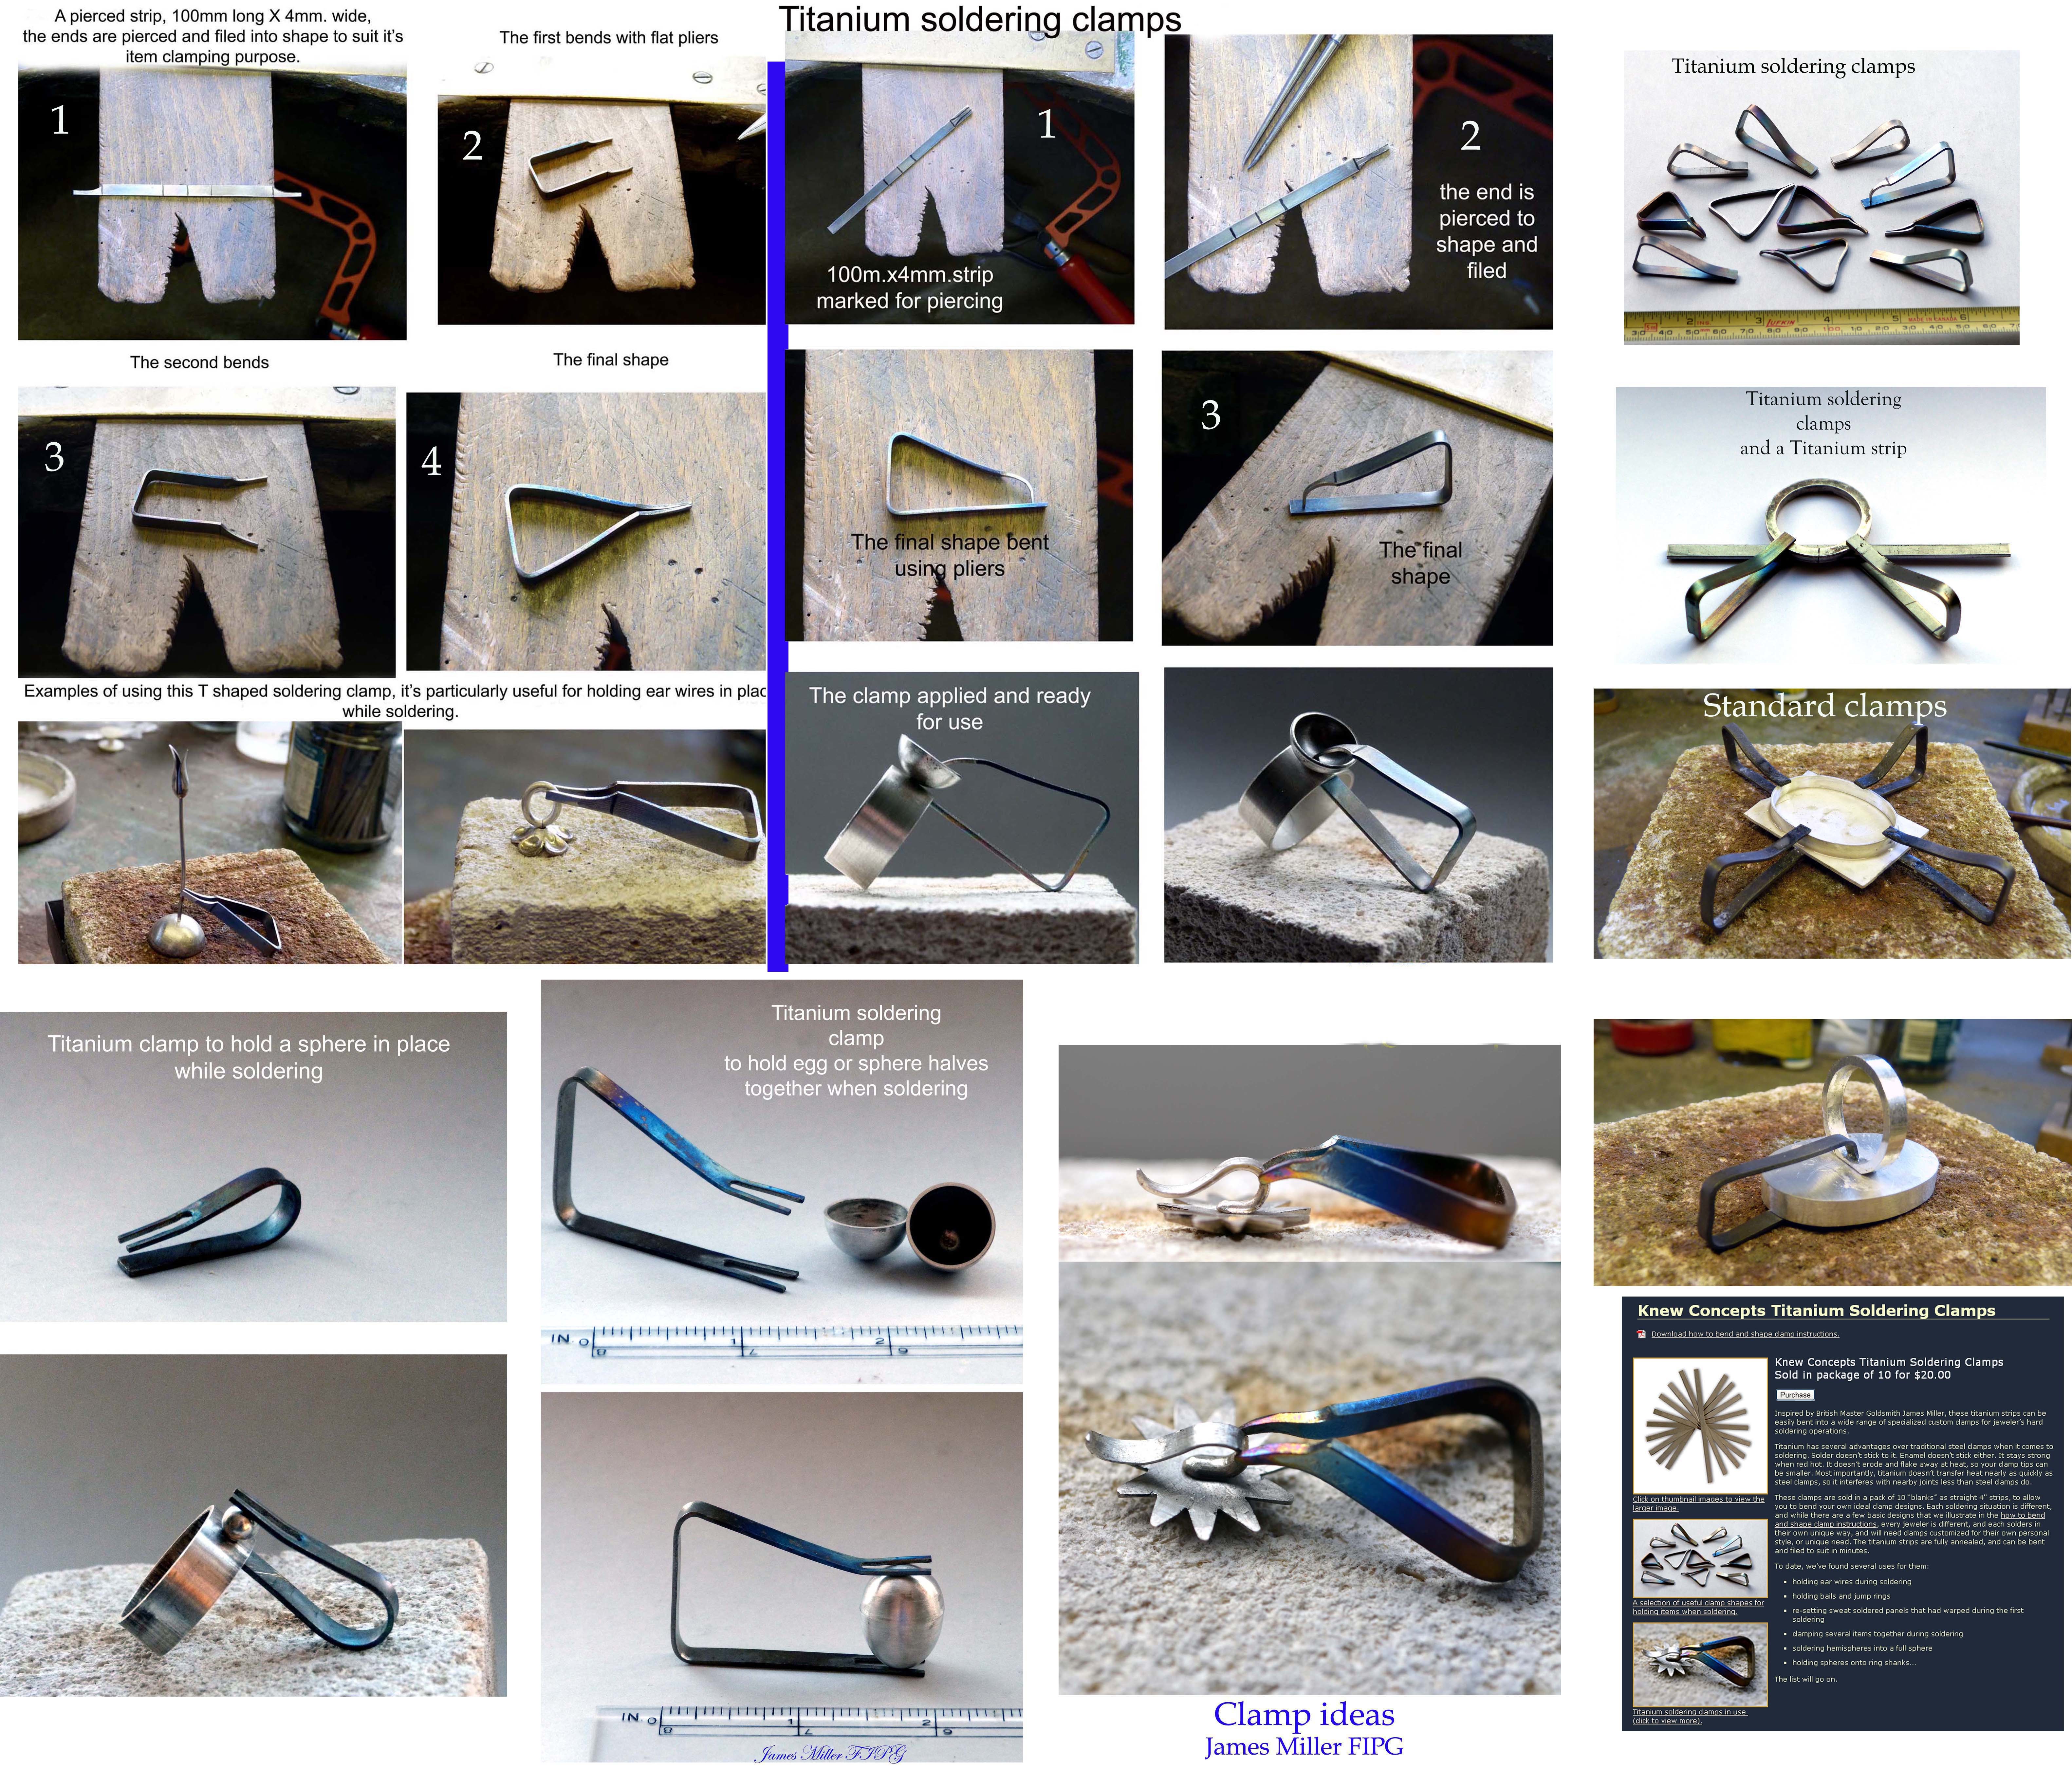 These are some shapes and uses of titanium soldering clamps - Jewelry  Discussion - Ganoksin Orchid Jewelry Forum Community for Jewelers and  Metalsmiths